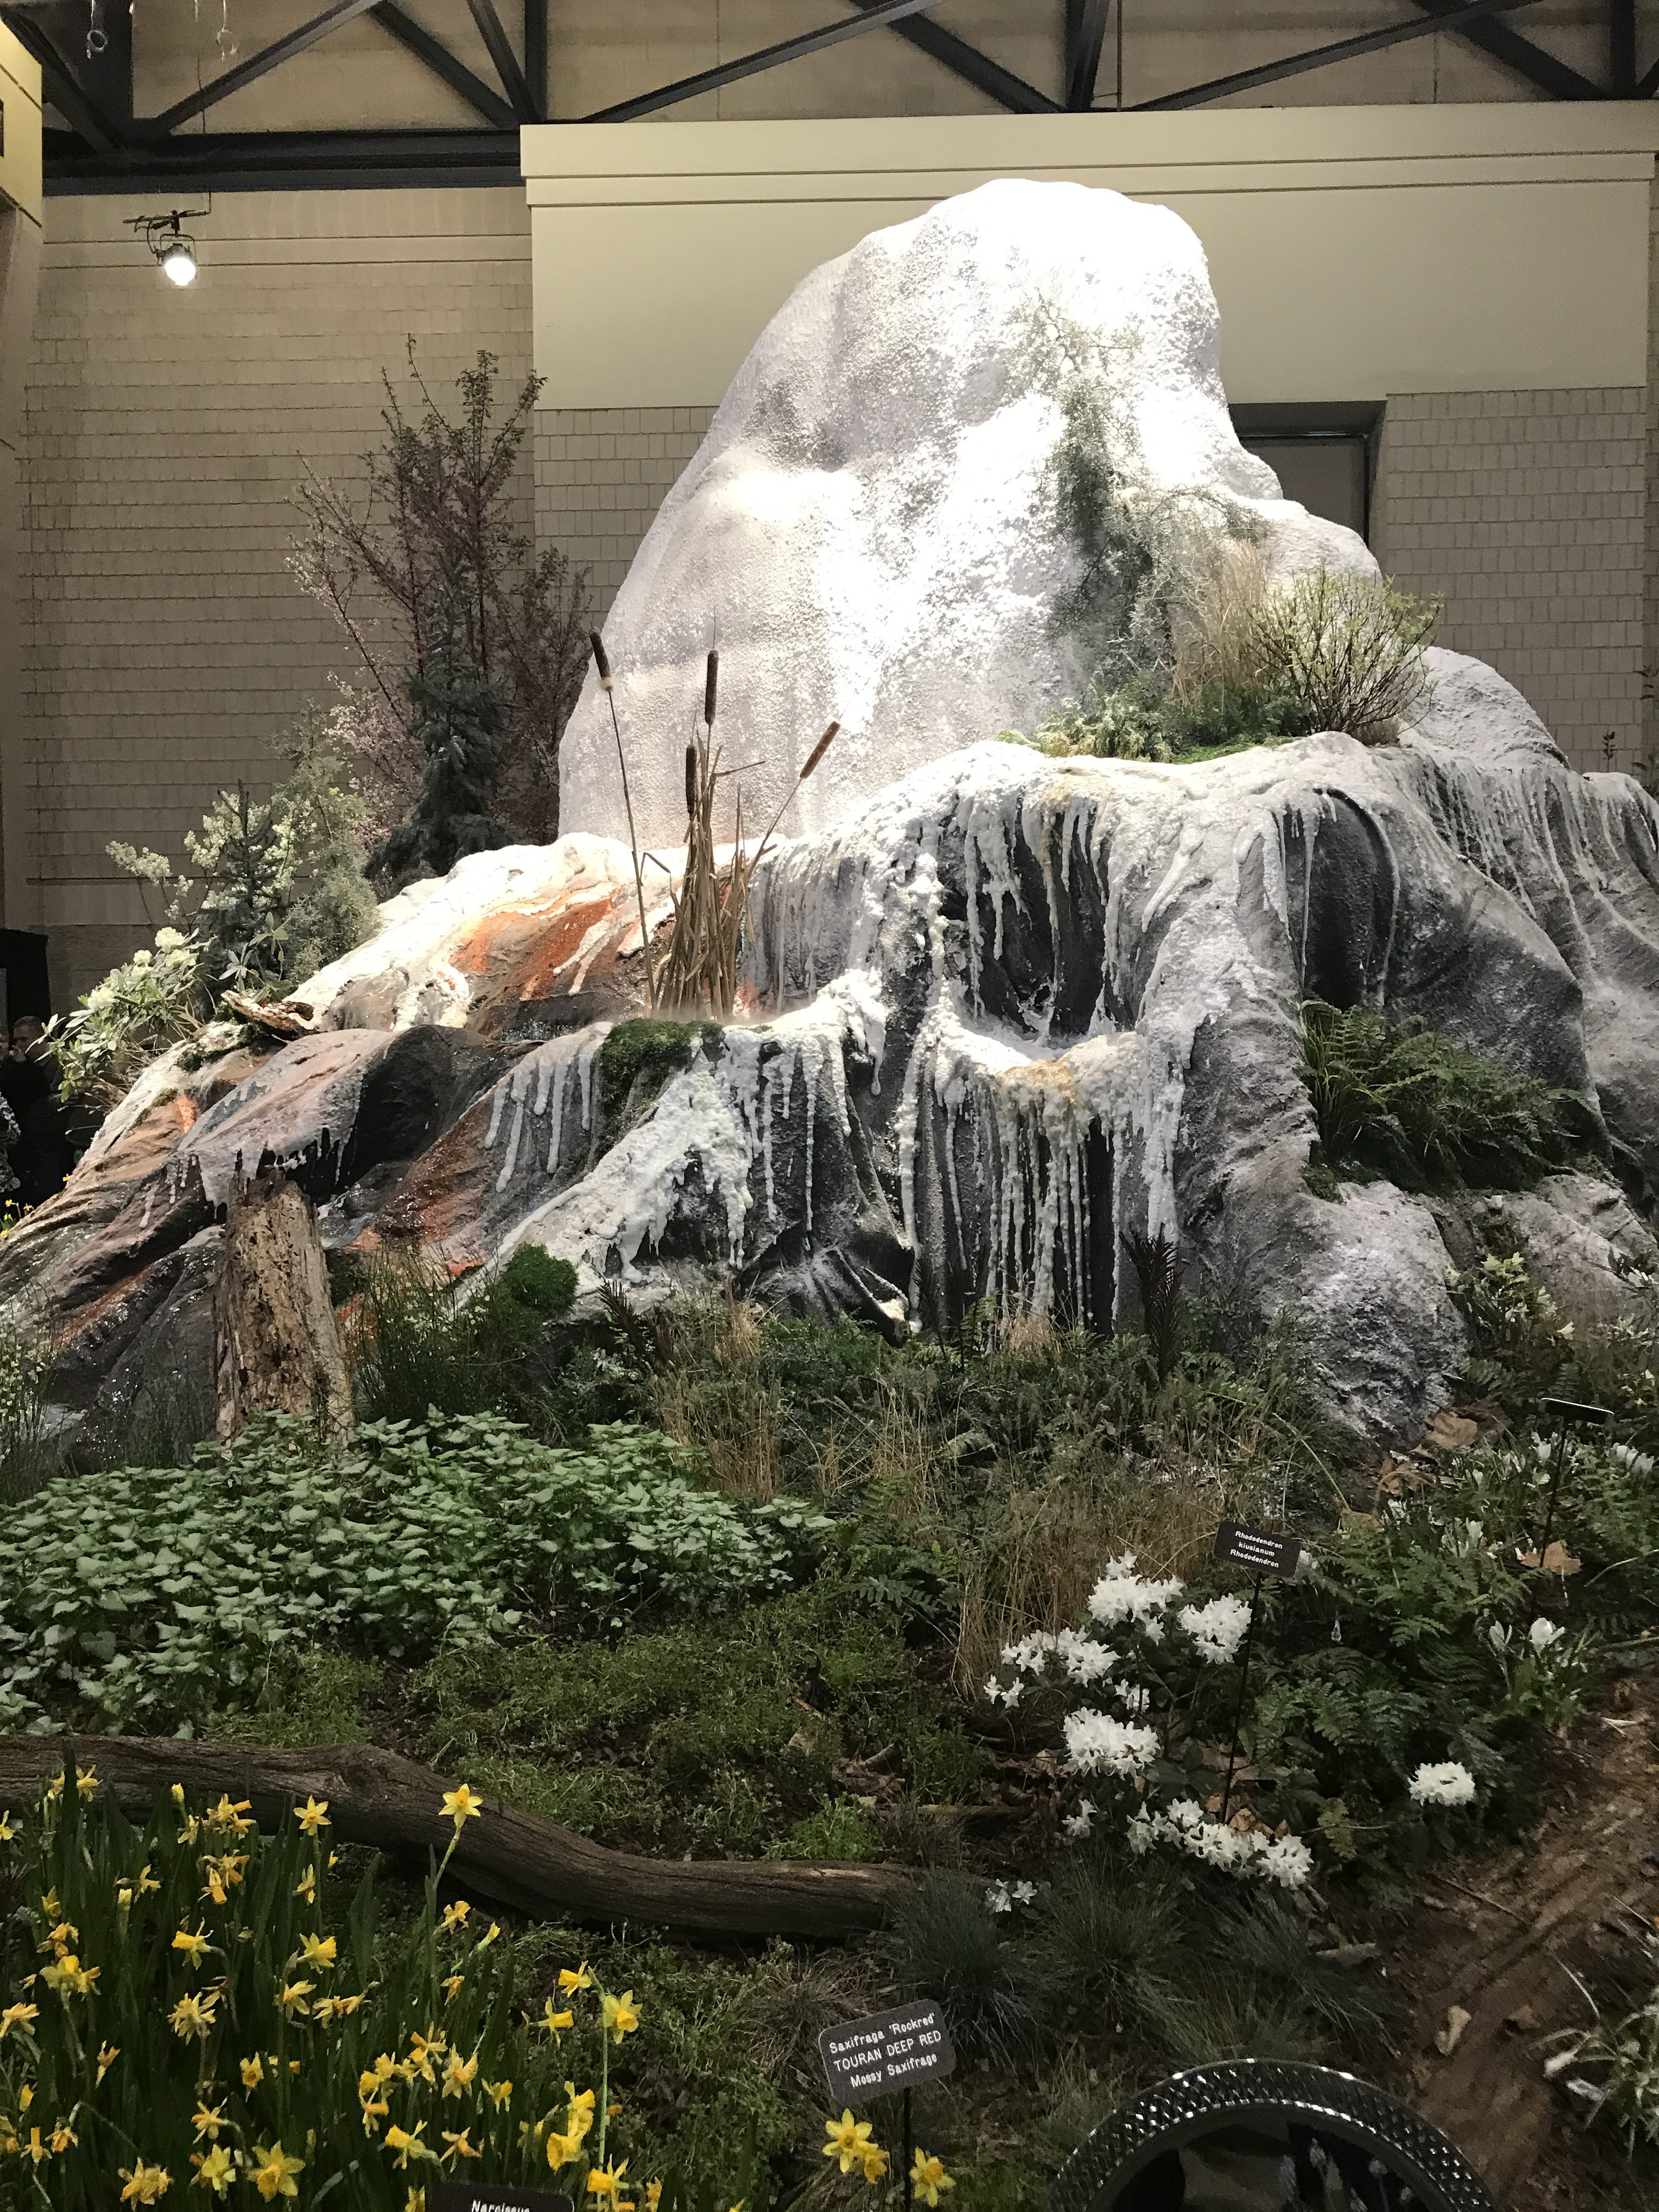 2018 Philly Flower Show; Replica of Mountain Stream of Ice Water Melt